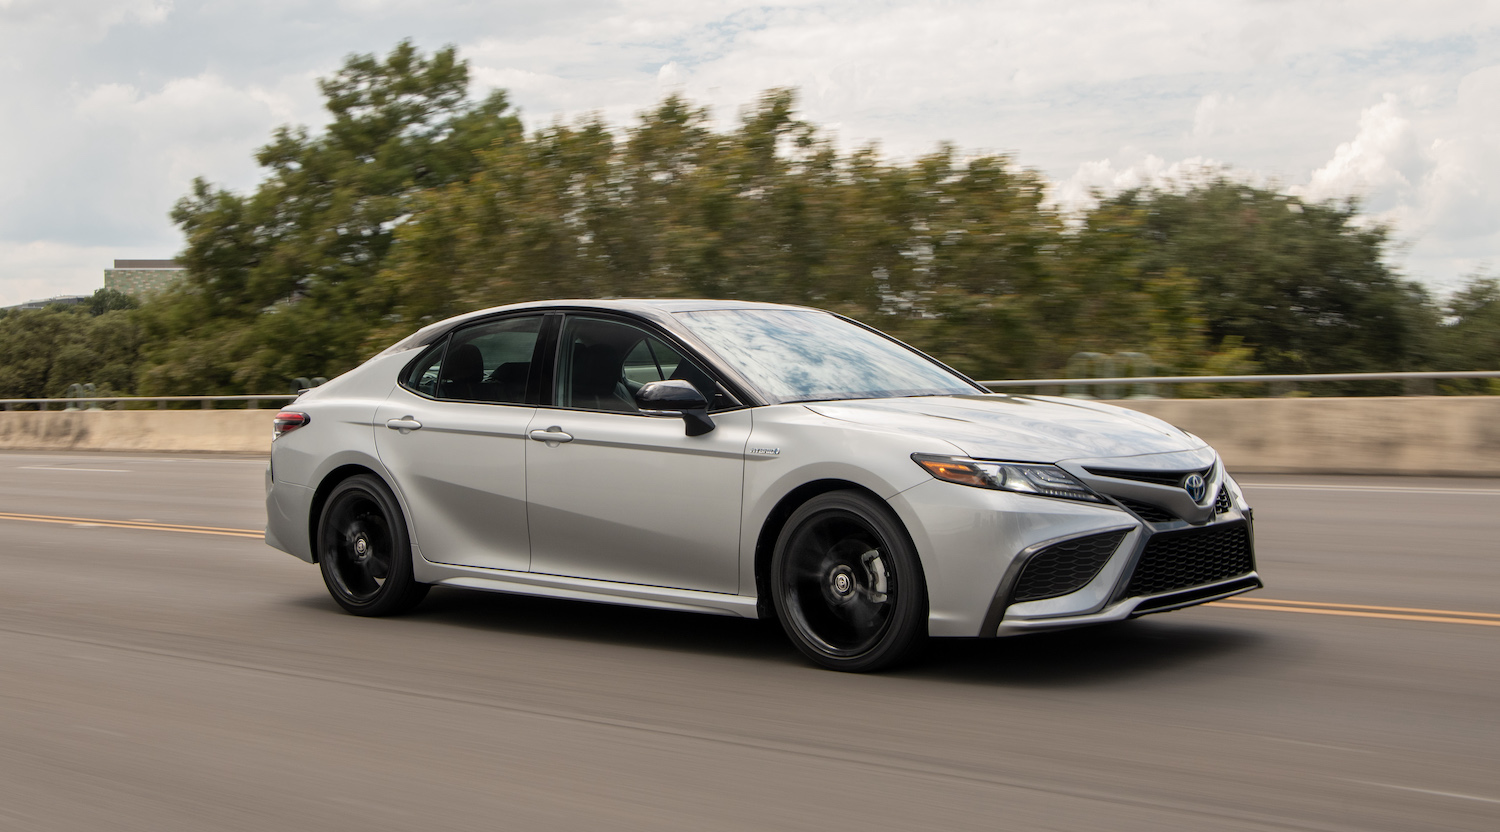 A silver 2022 Toyota Camry Hybrid driving, the 2022 Toyota Camry Hybrid is among the cheapest hybrid cars of 2022